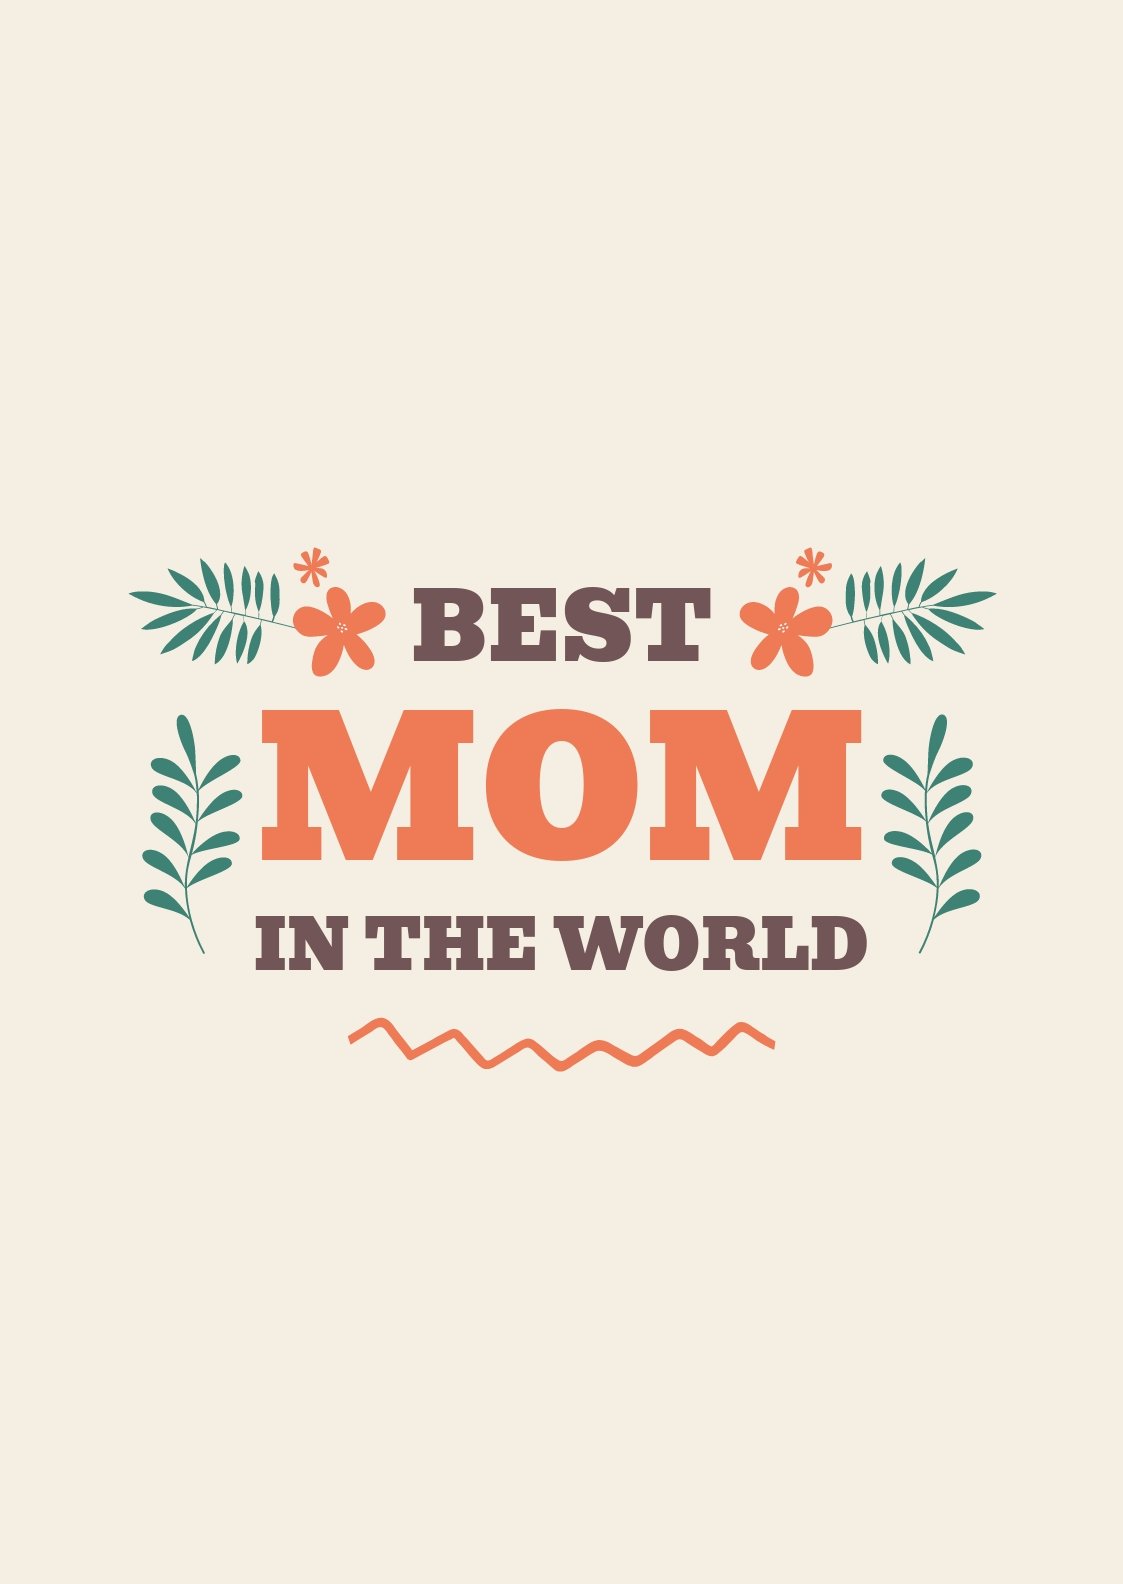 Best Mom In The World T-Shirt Template